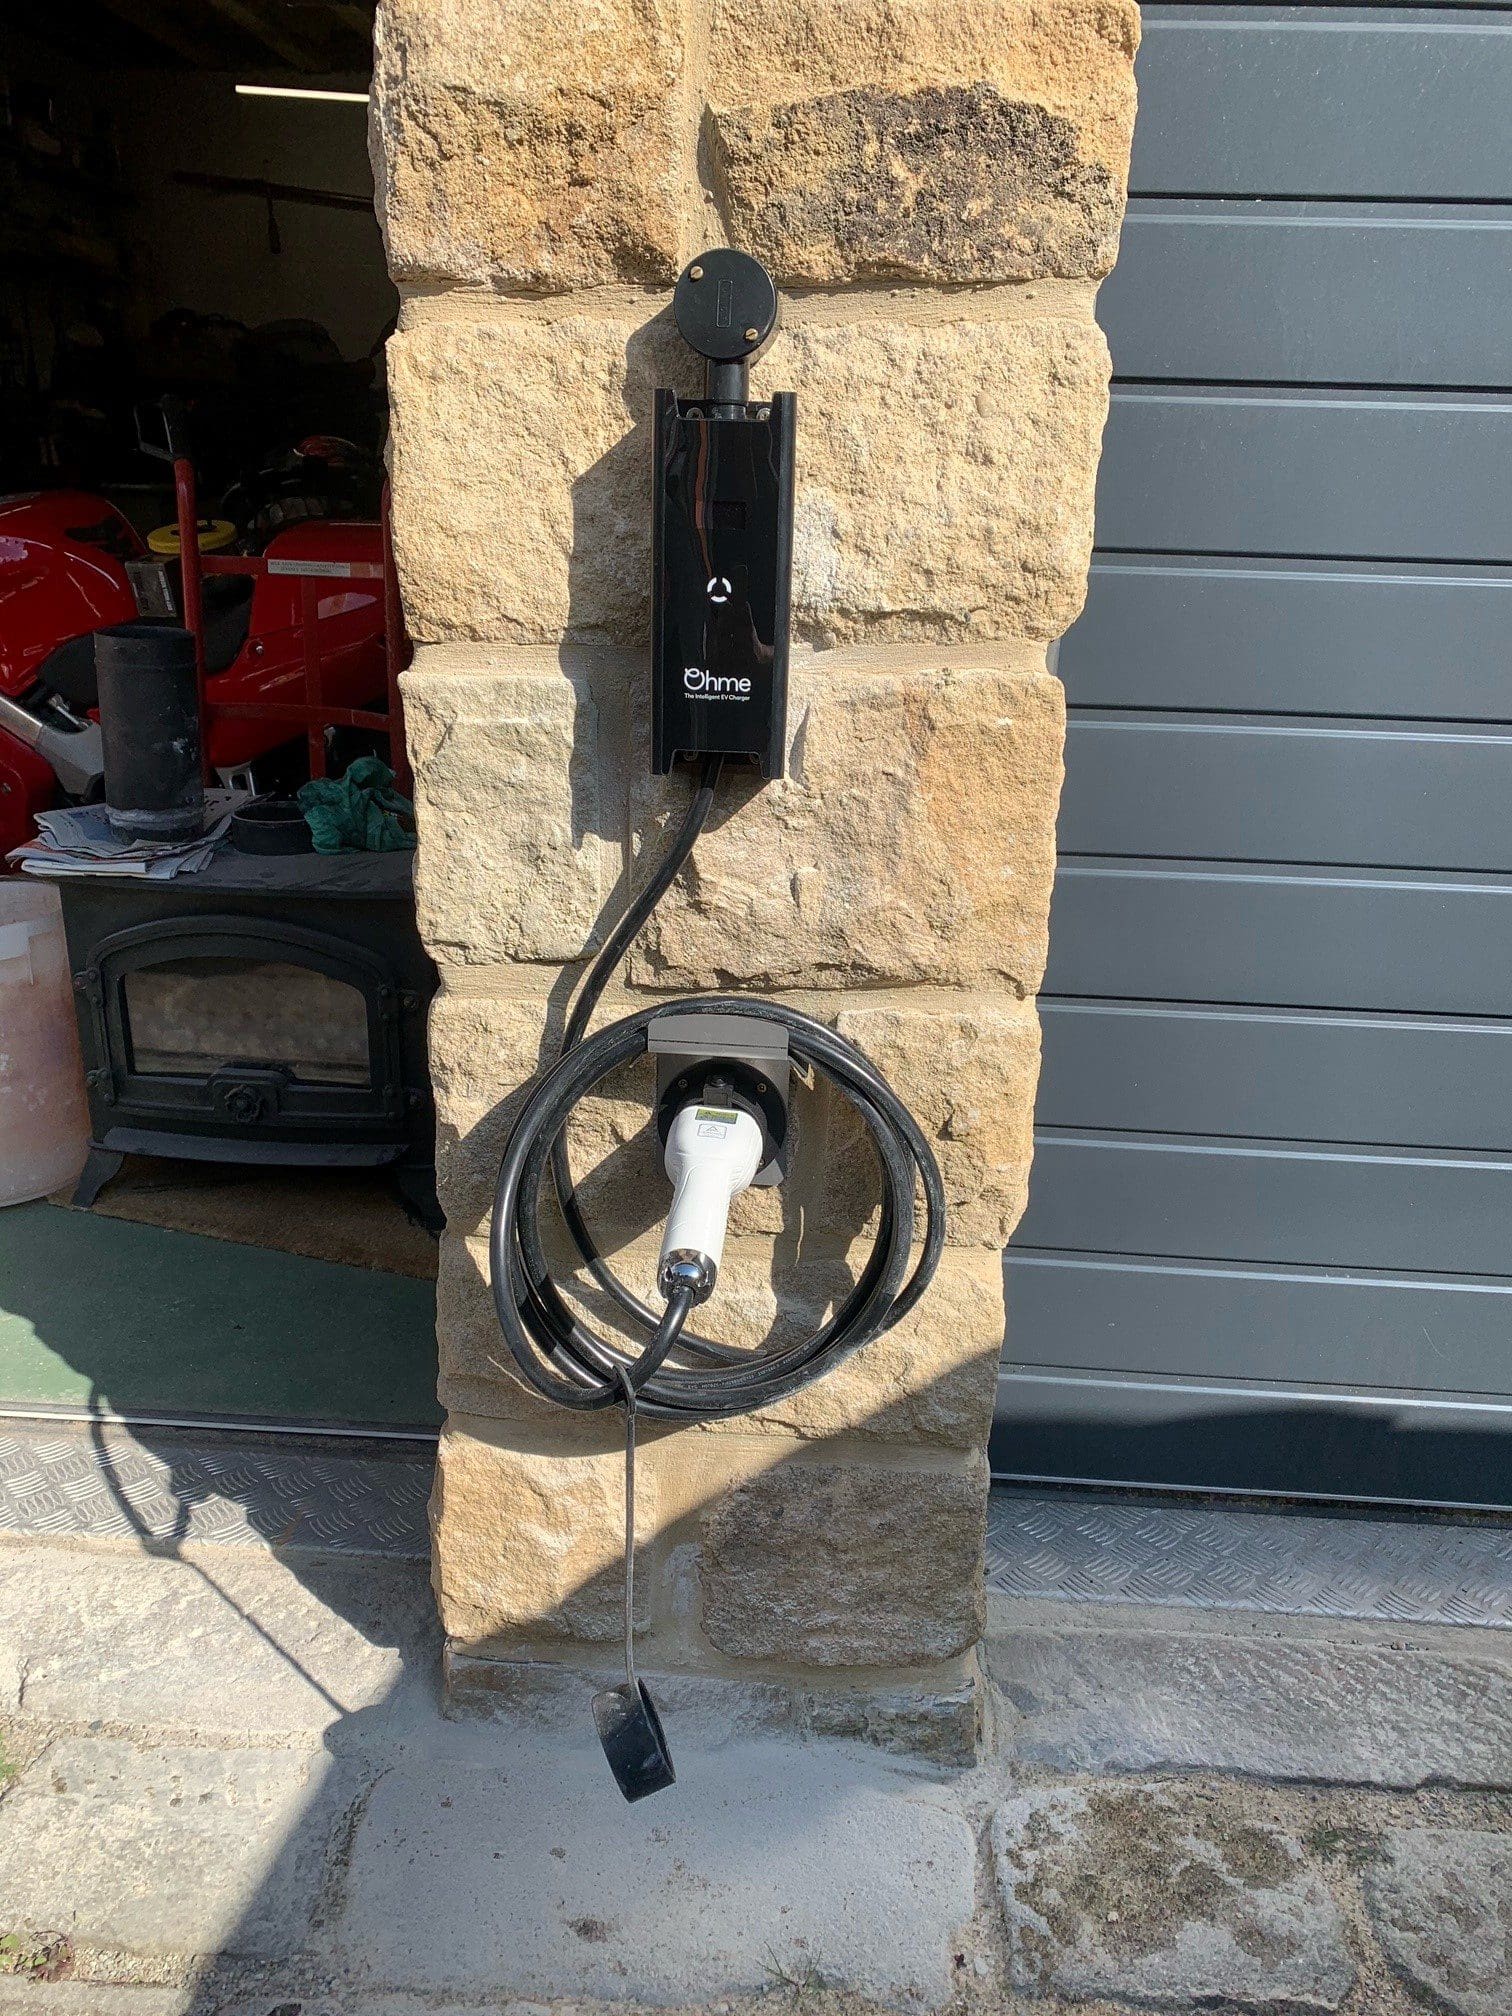 EV Charger Installers Burley in Wharfedale